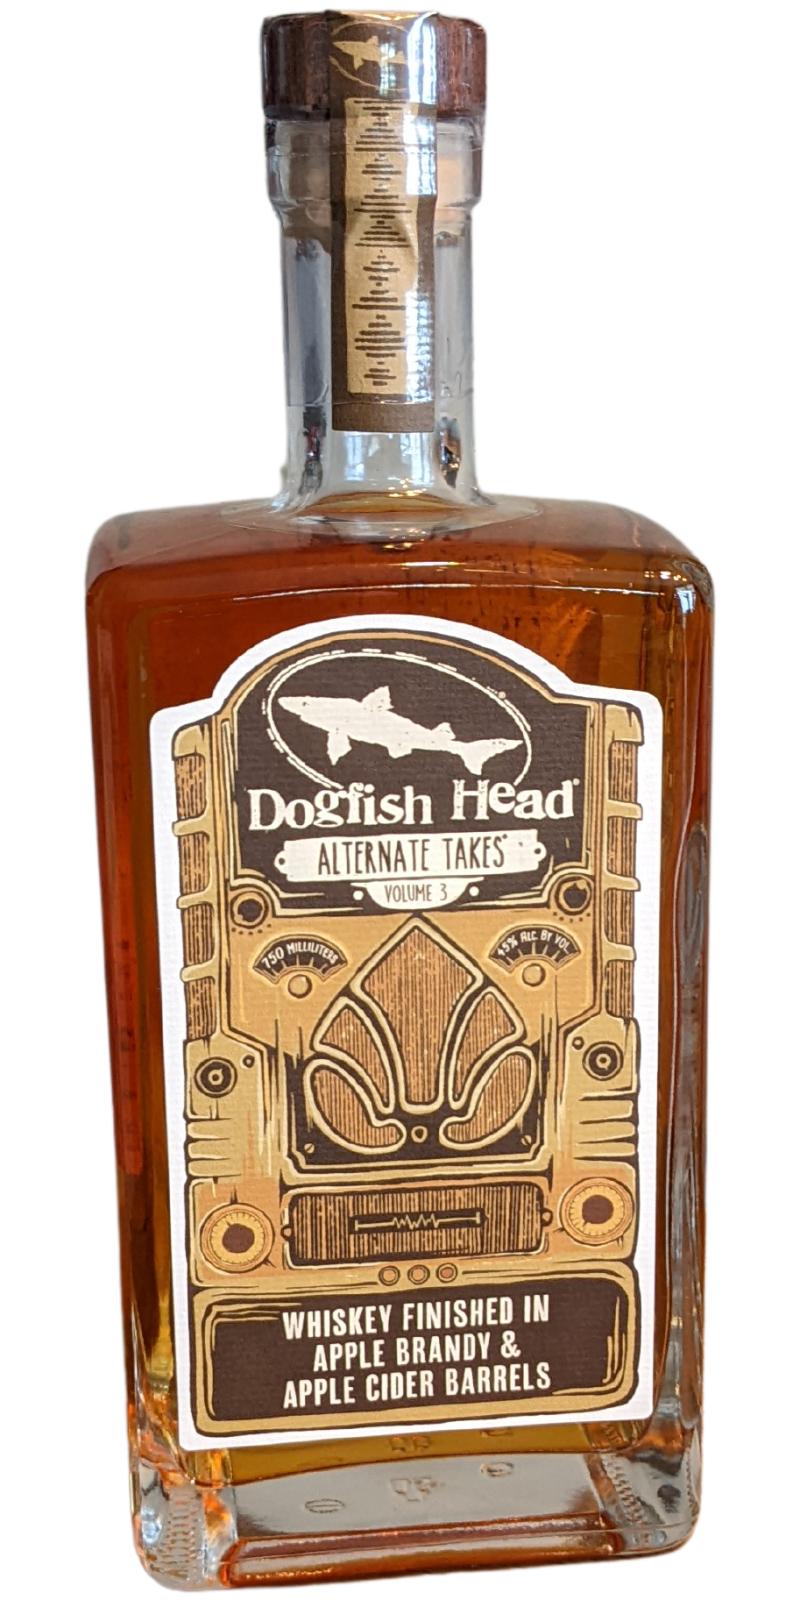 Dogfish Head Alternate Takes